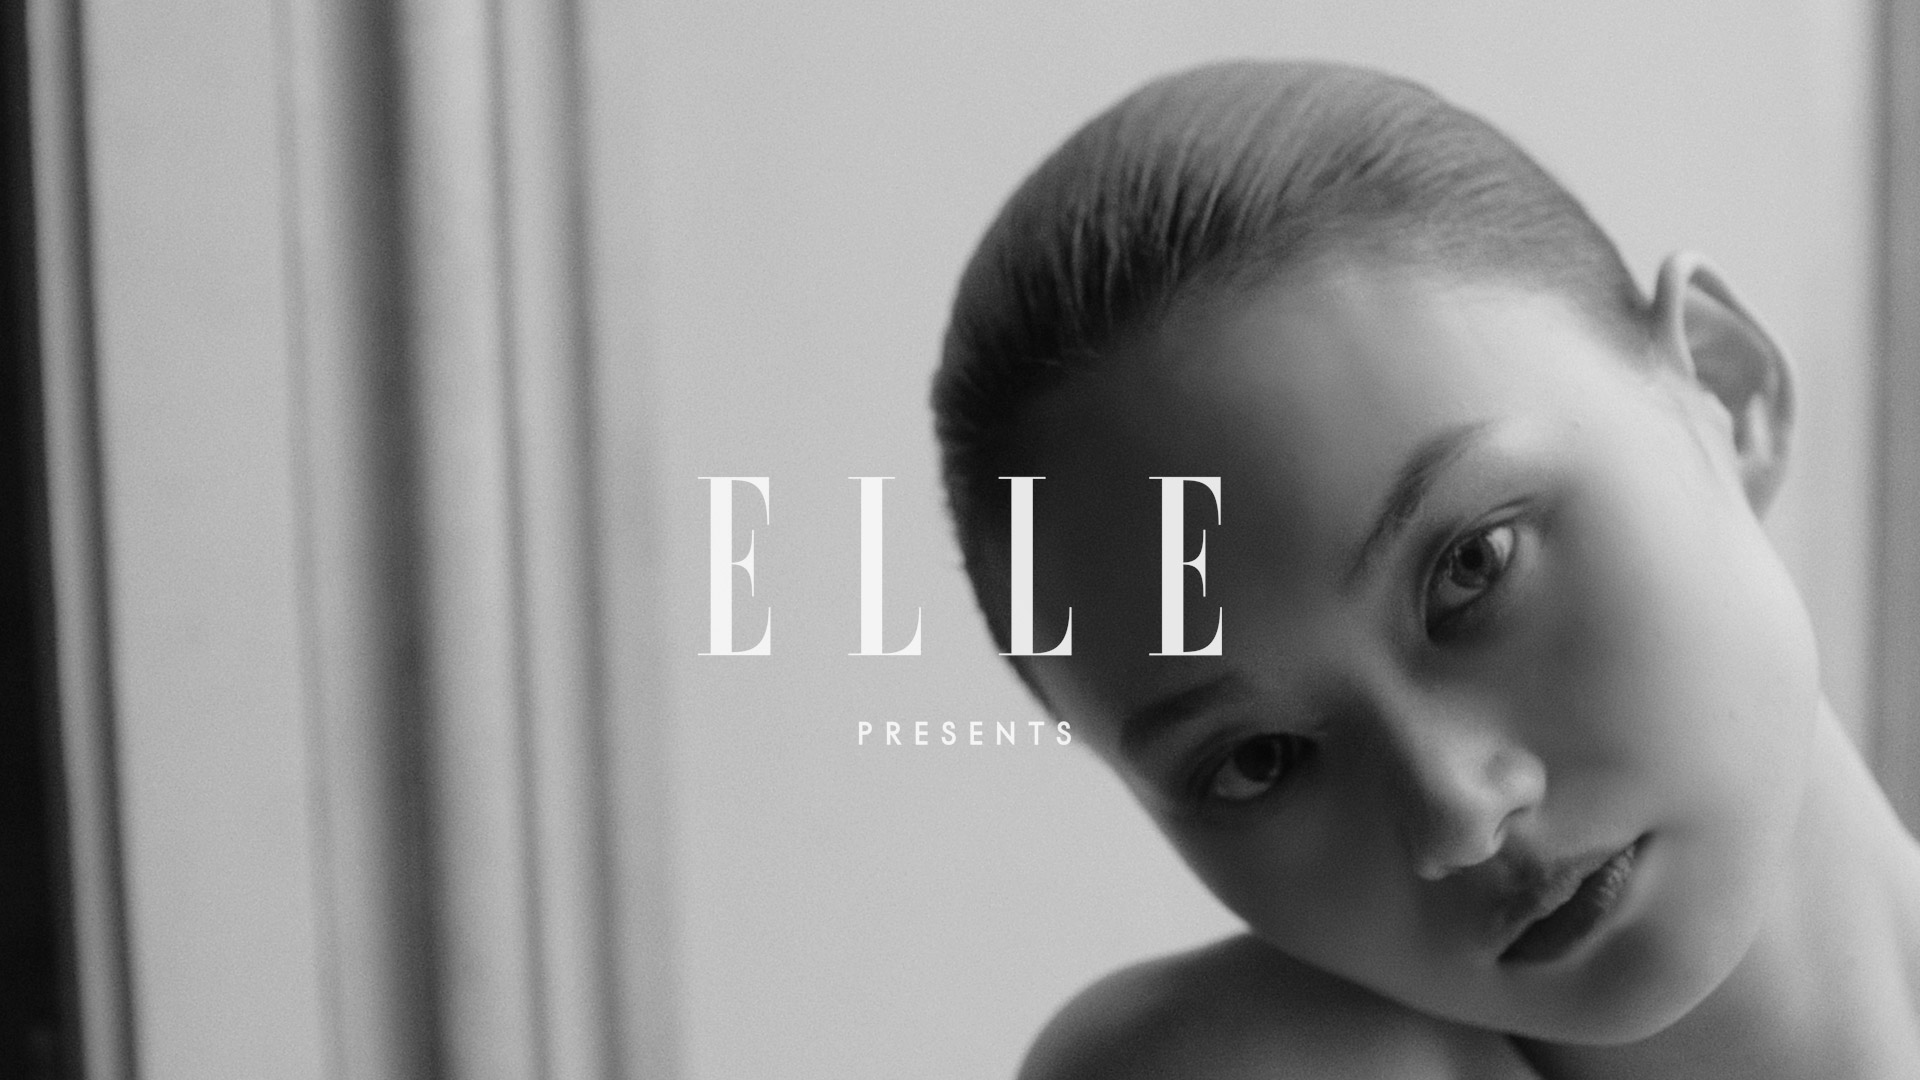 ELLE China Cover Story Beauty in Harmony x He Cong Video editor: Yushu Wang Video producer: Quentin Bordes Production Video assistant: Jorma Gaume Voice over: Coralie Fontanel Colorist: MZ Post